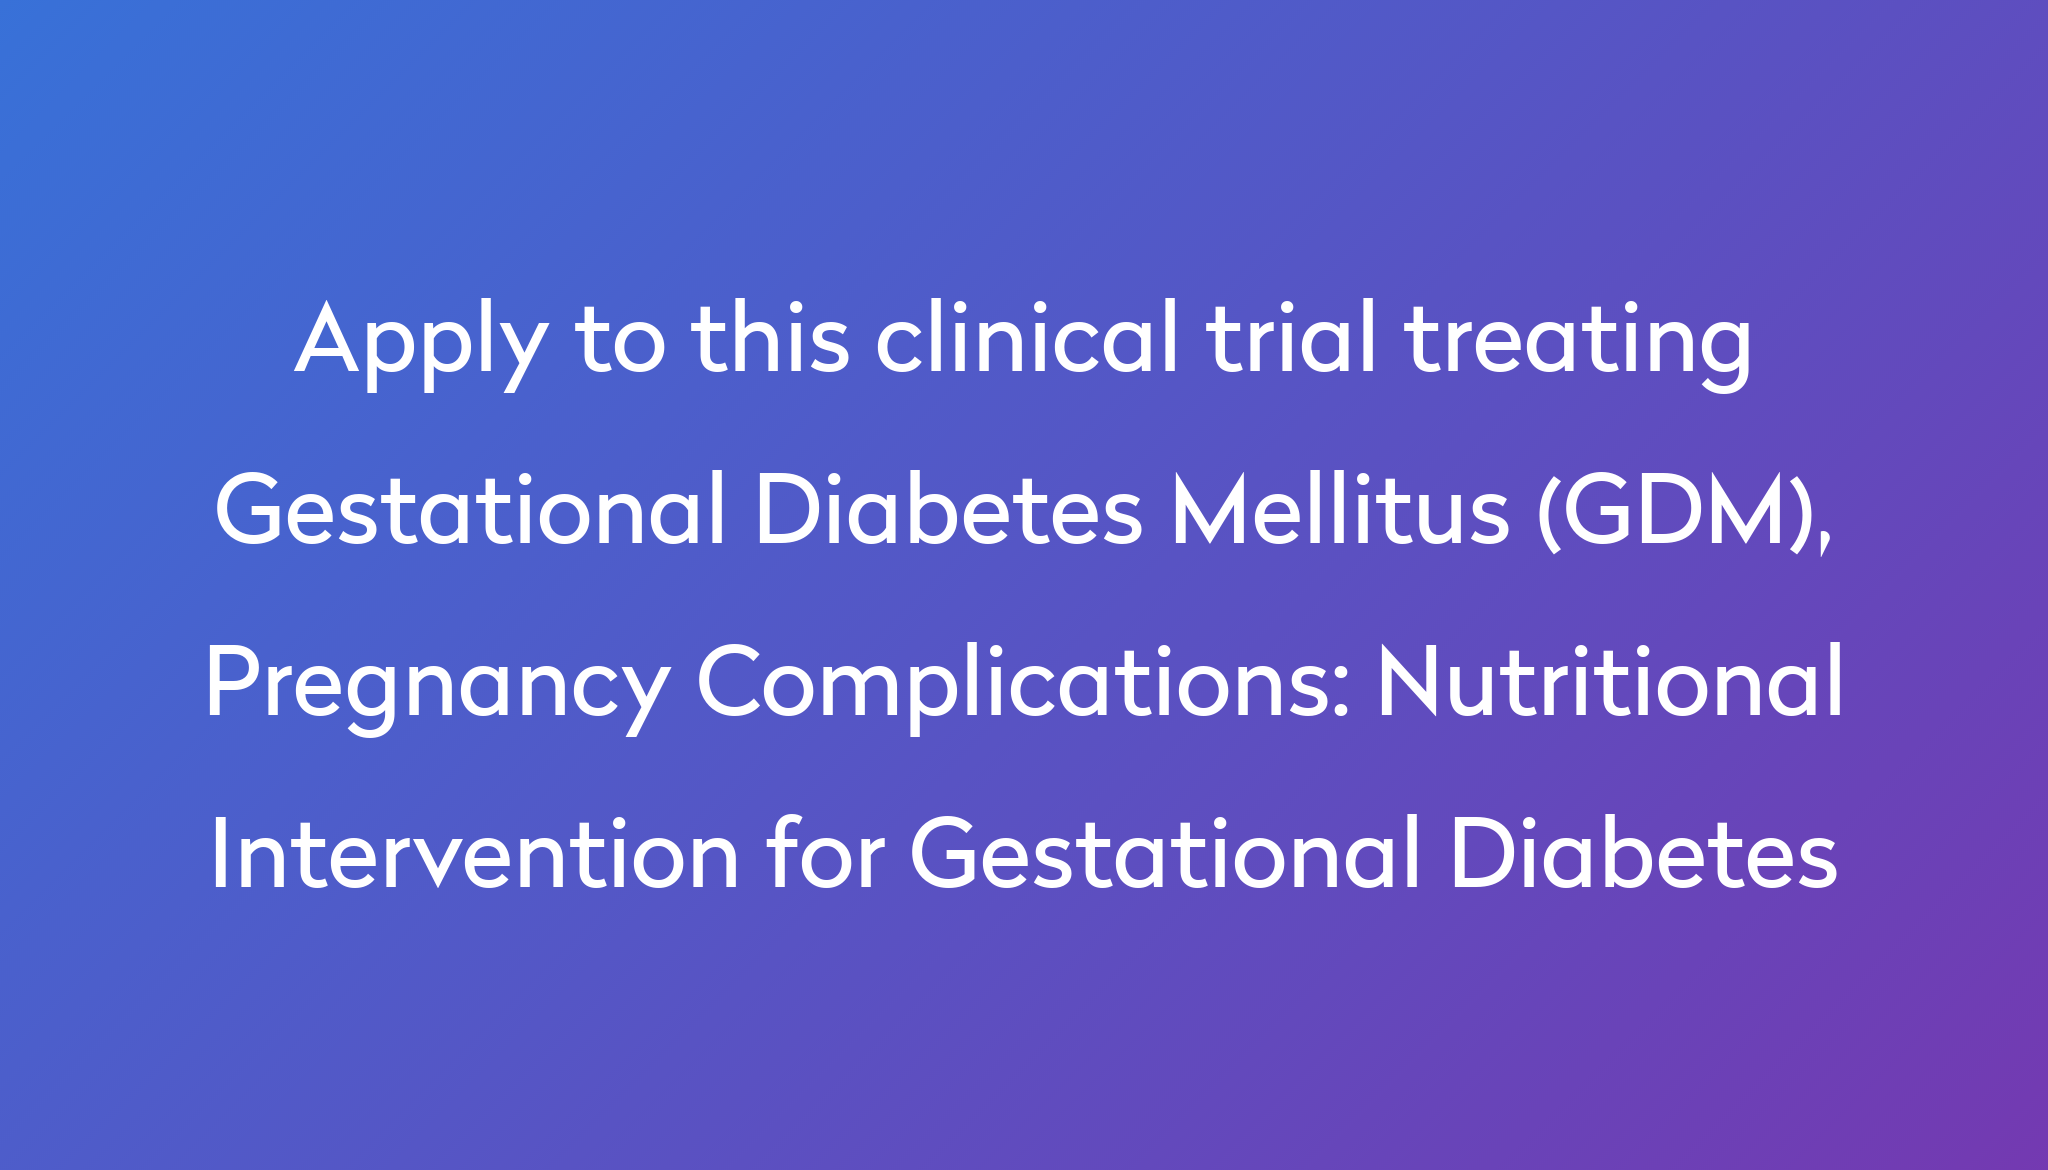 Nutritional Intervention for Gestational Diabetes Clinical Trial 2023